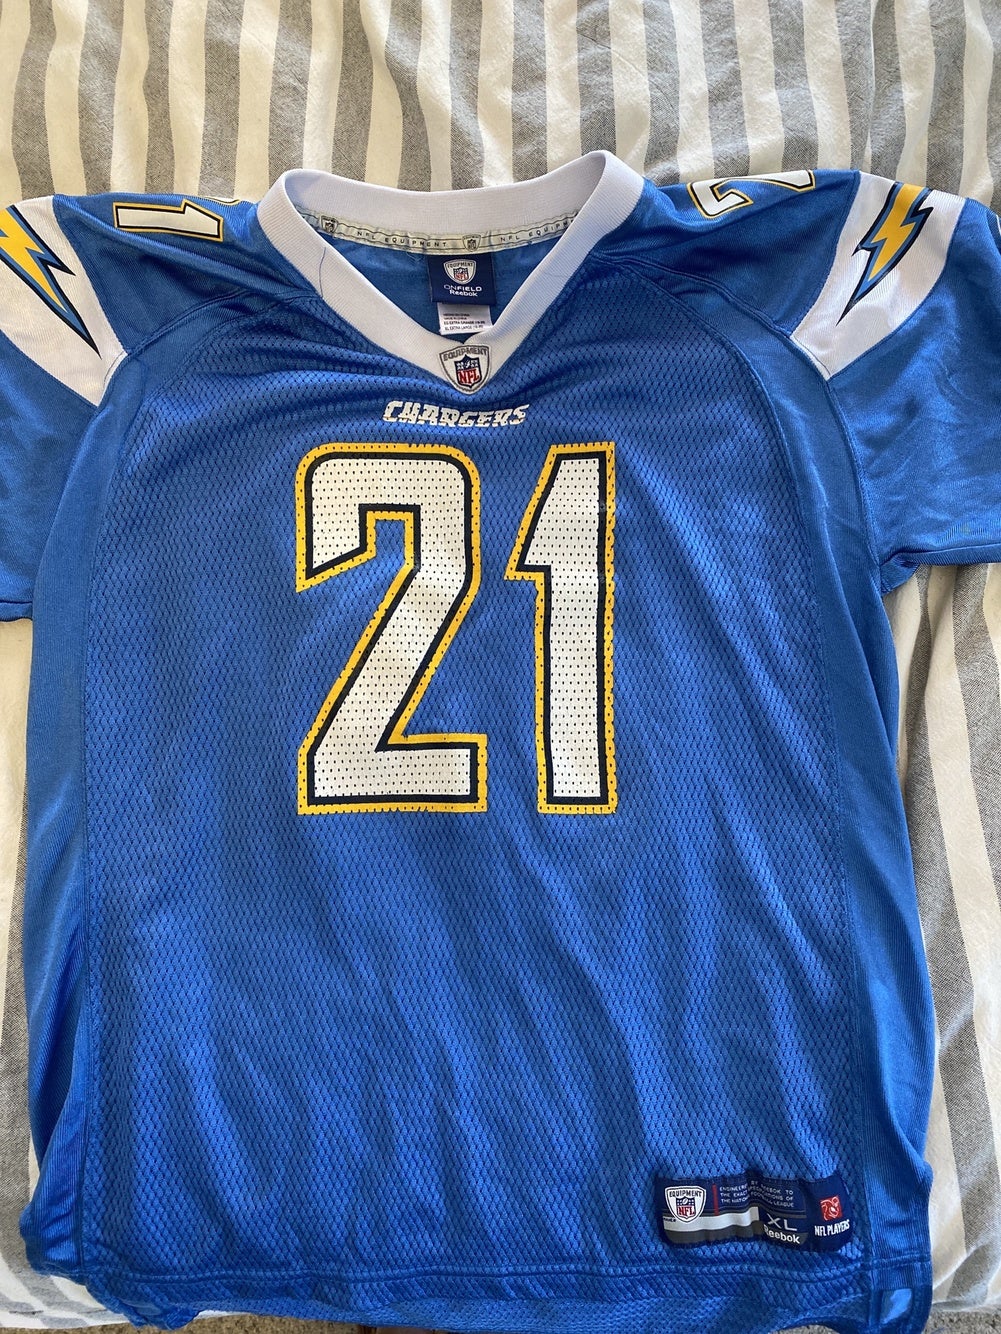 chargers nfl jersey vs reebok